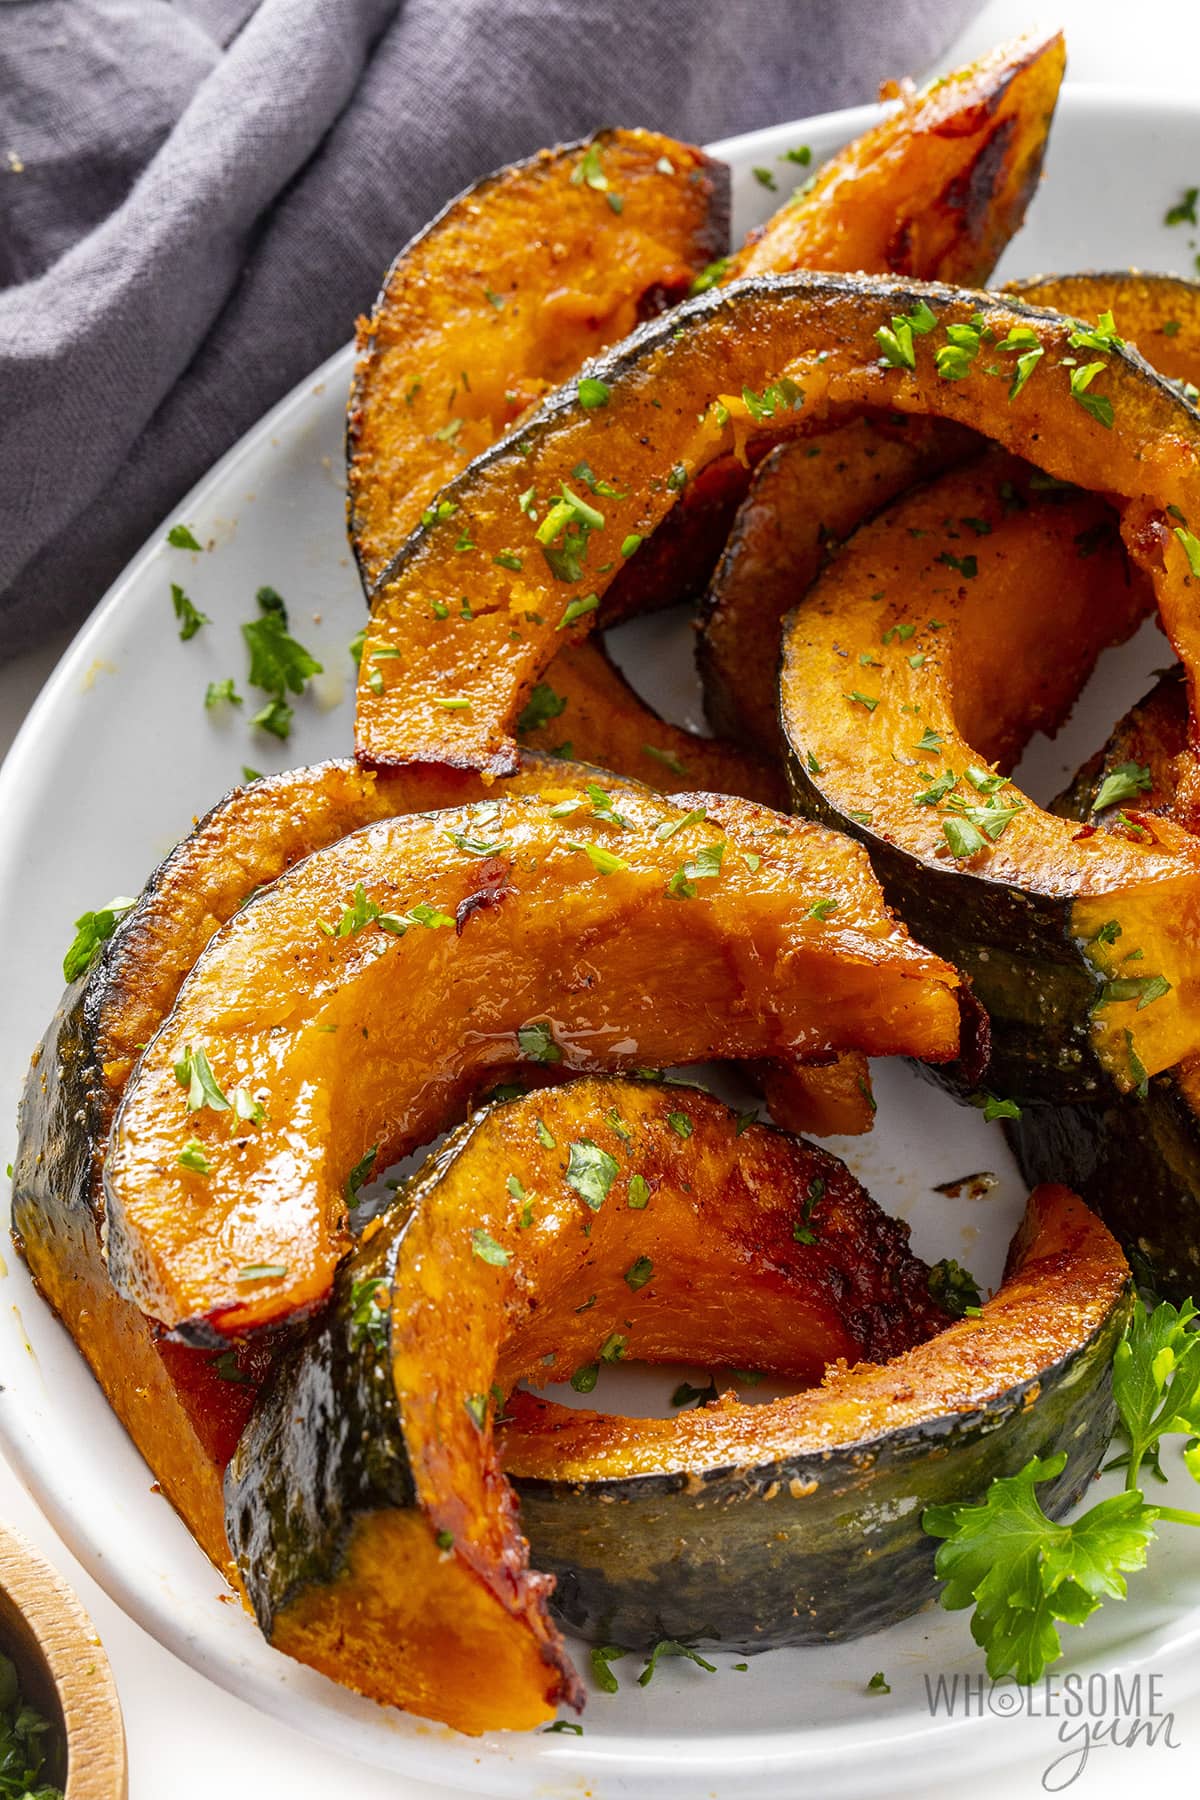 Place the kabocha pumpkin wedges on a plate.